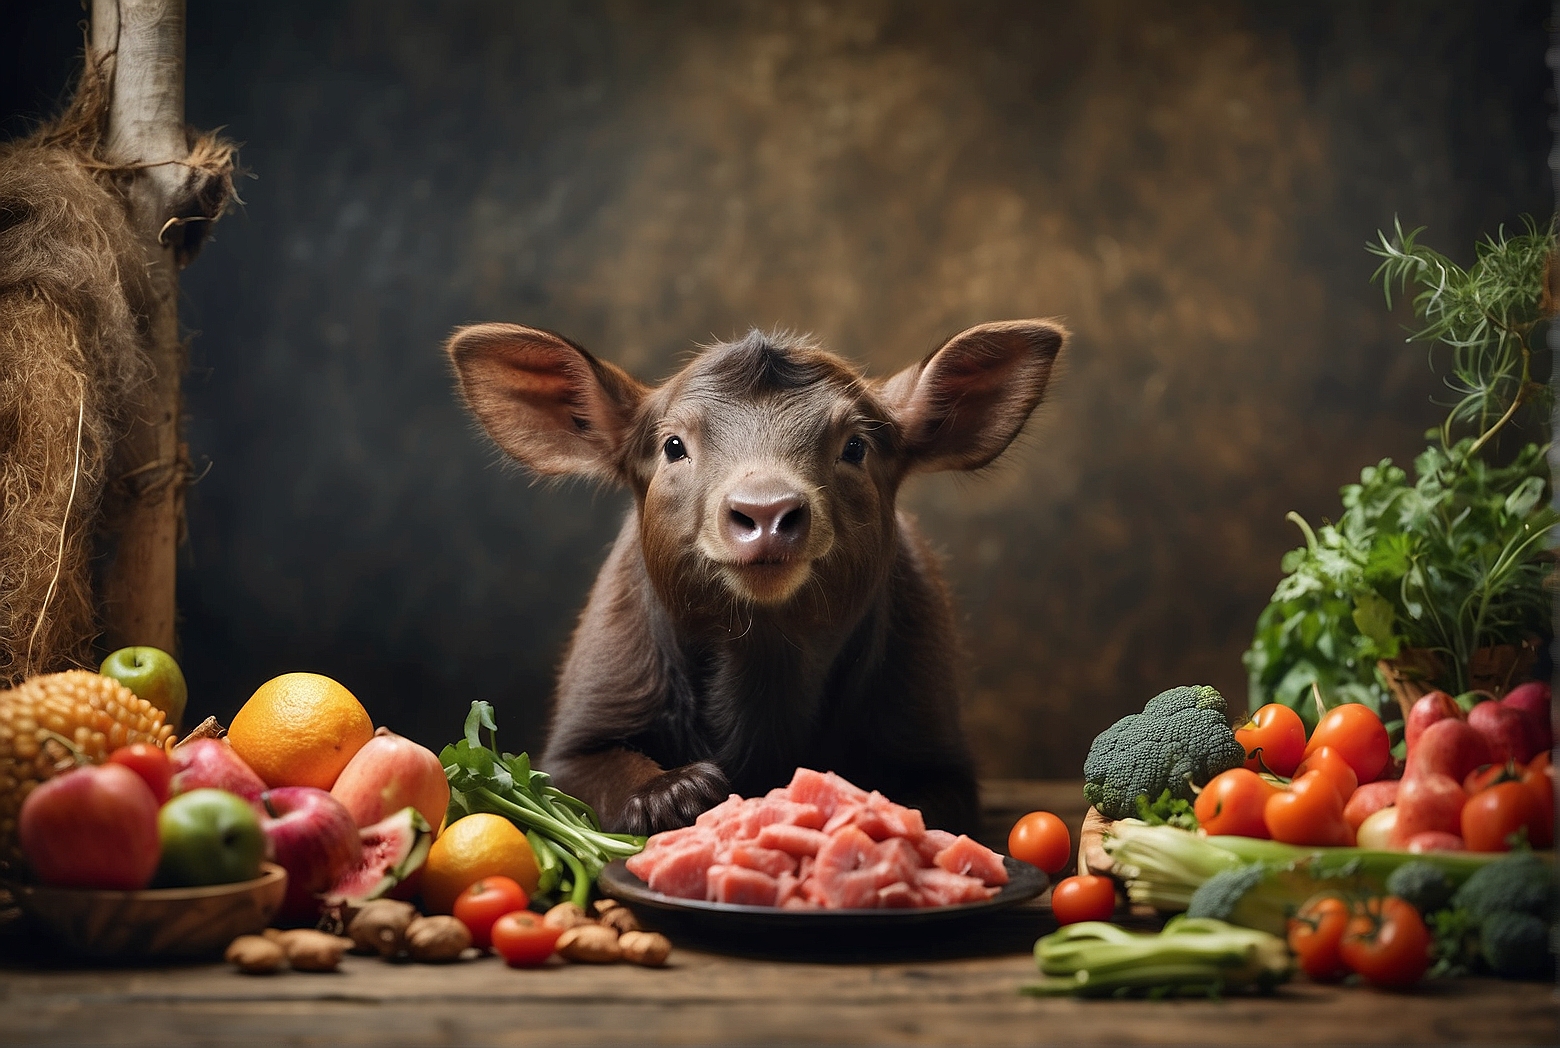 The Diet of Animals: What Do They Eat?